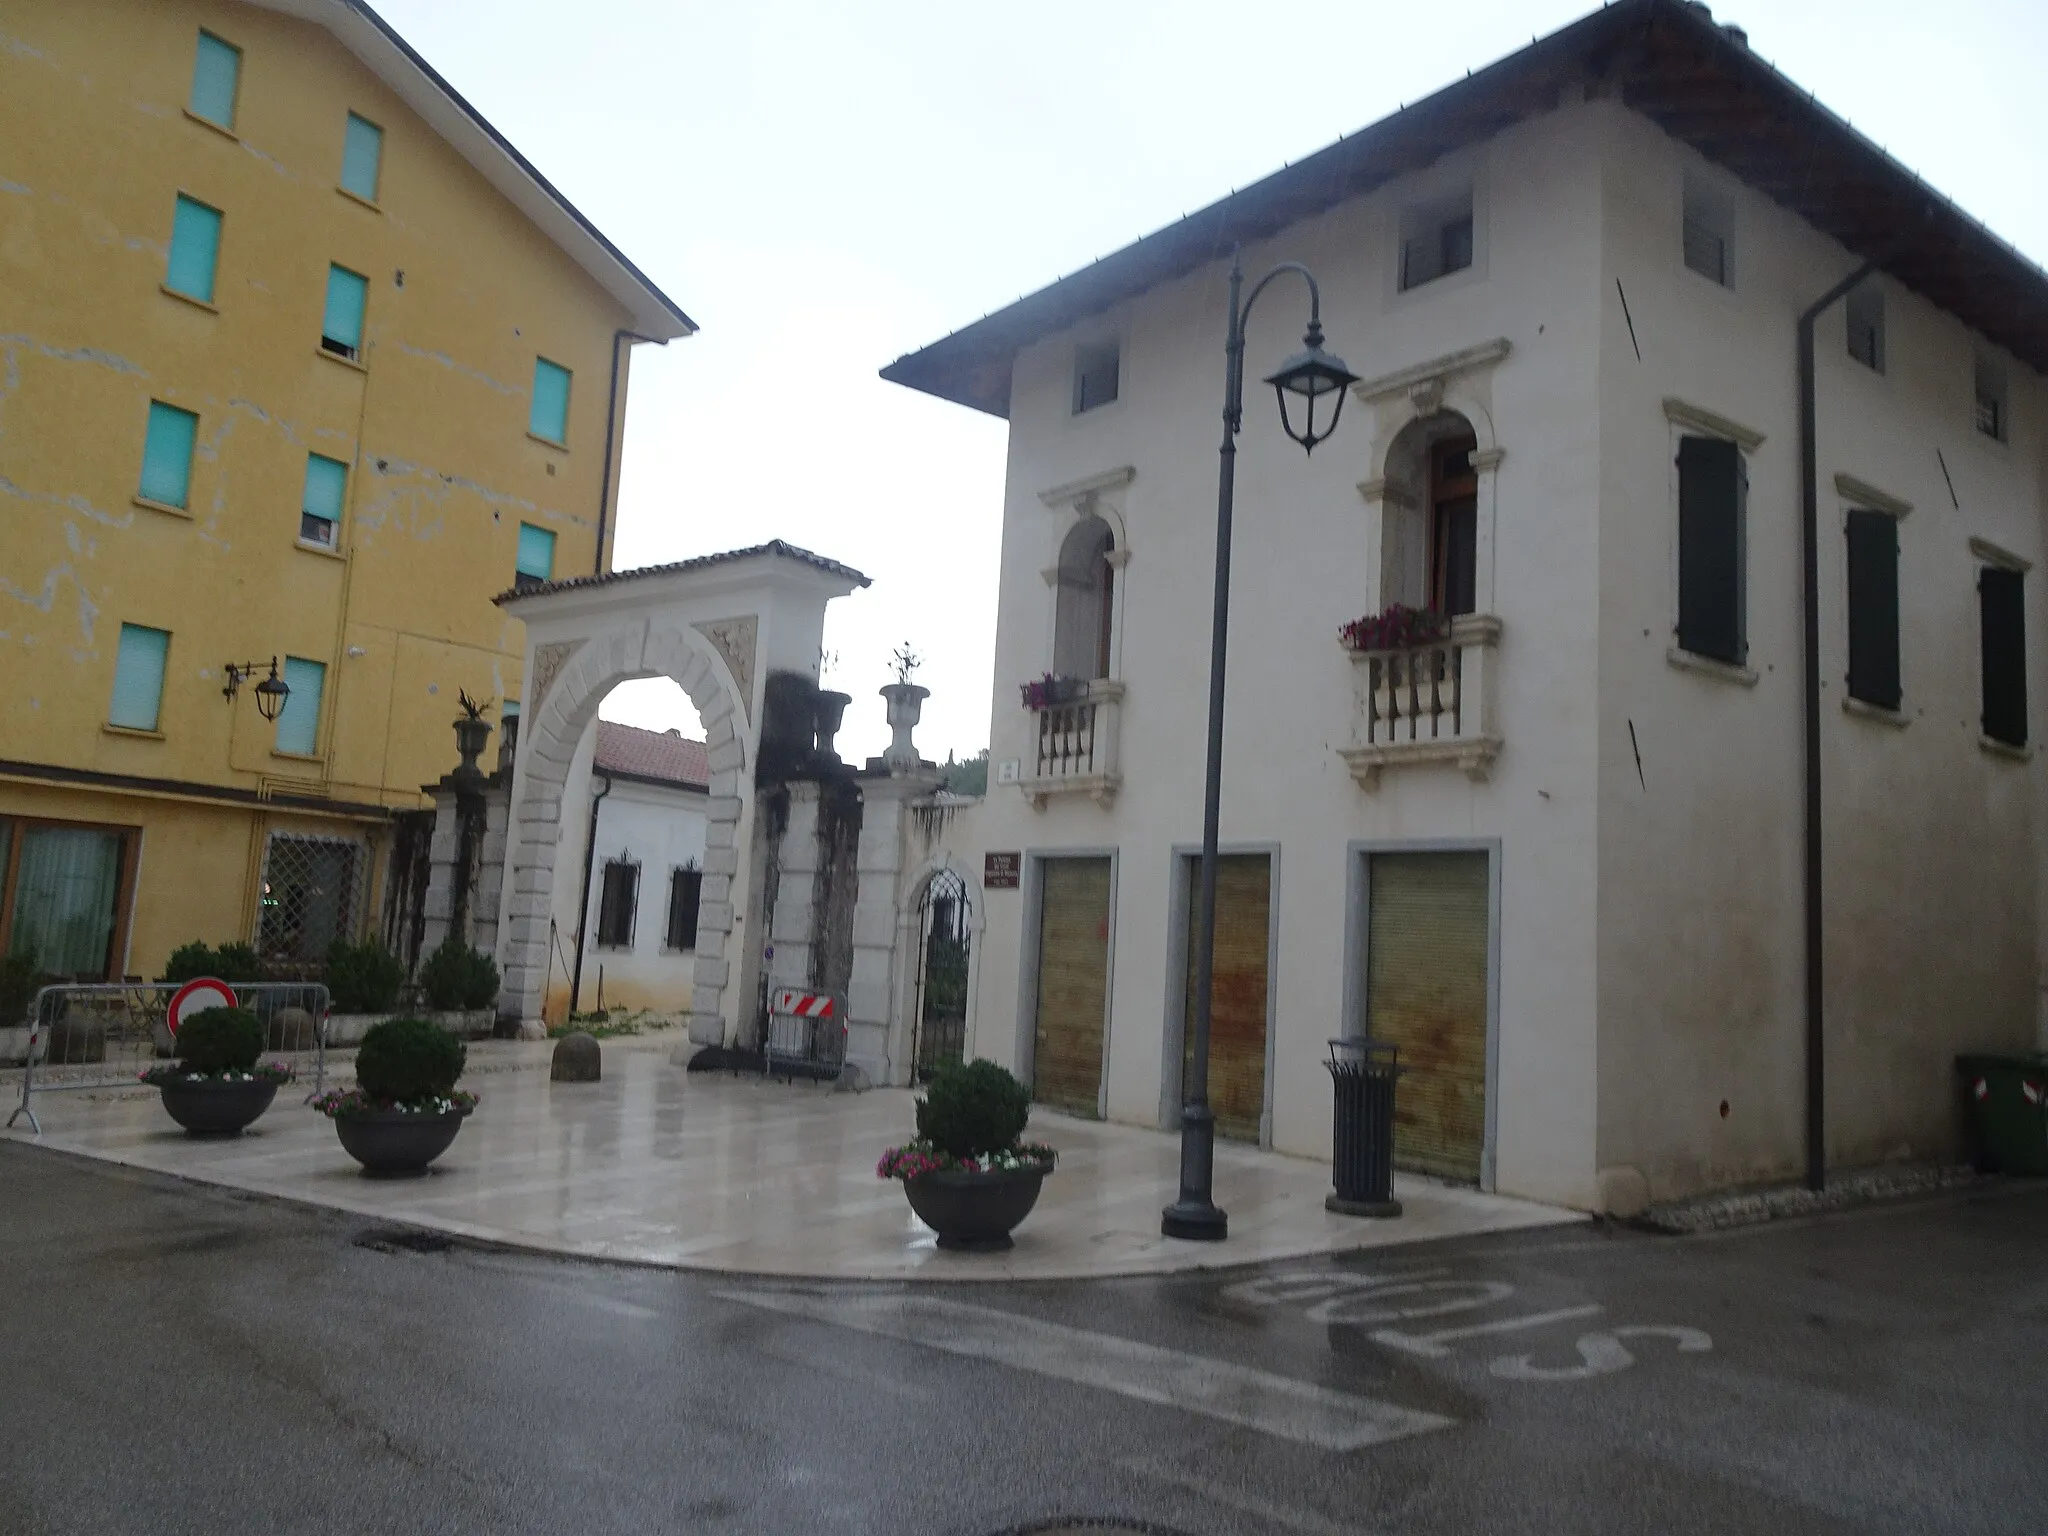 Image of Montereale Valcellina